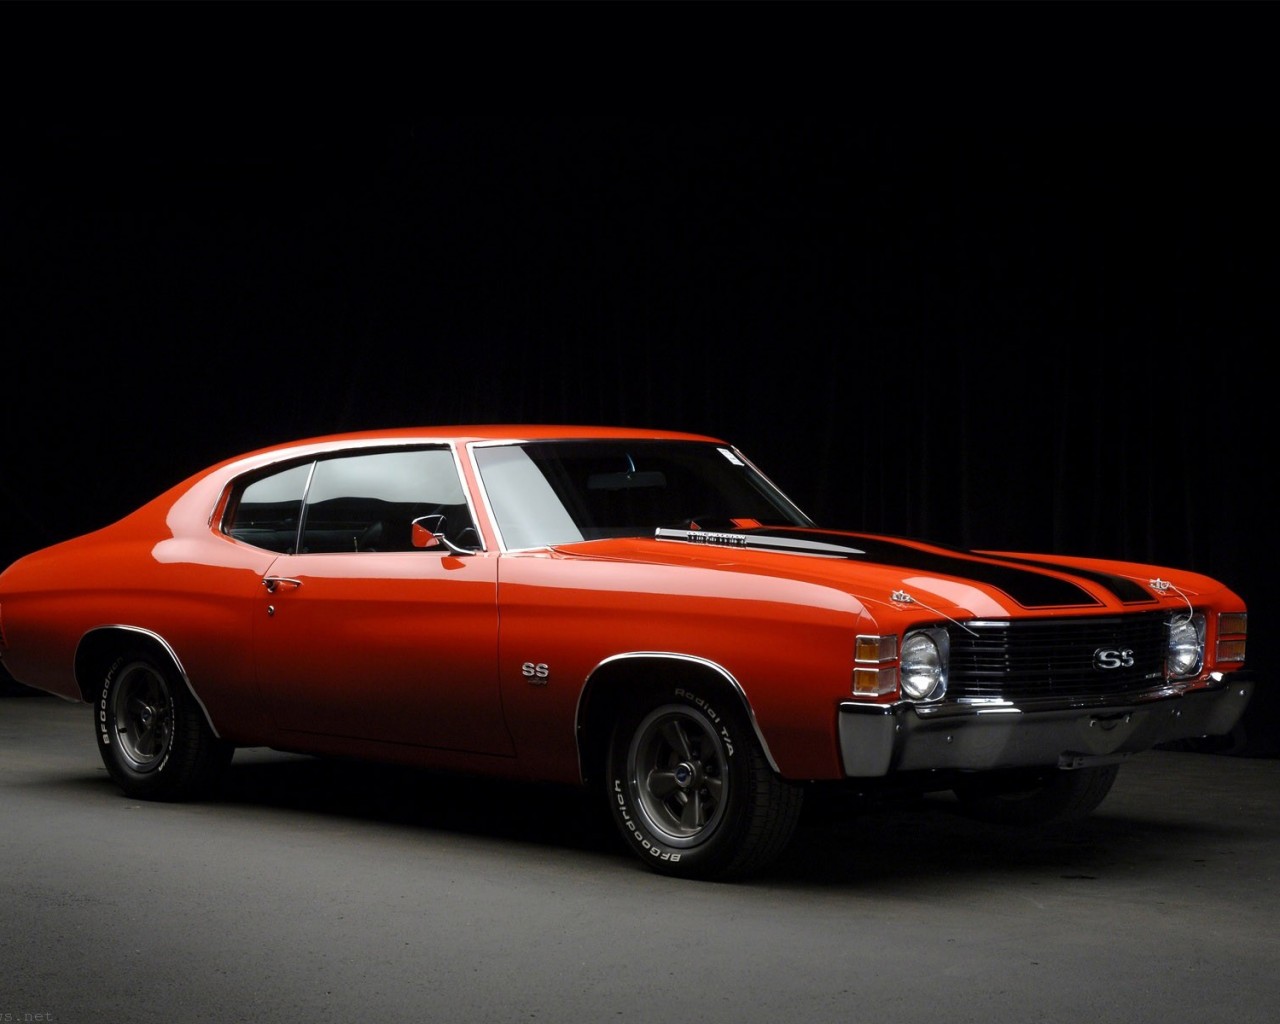 Chevy Muscle Car Wallpaper HD In